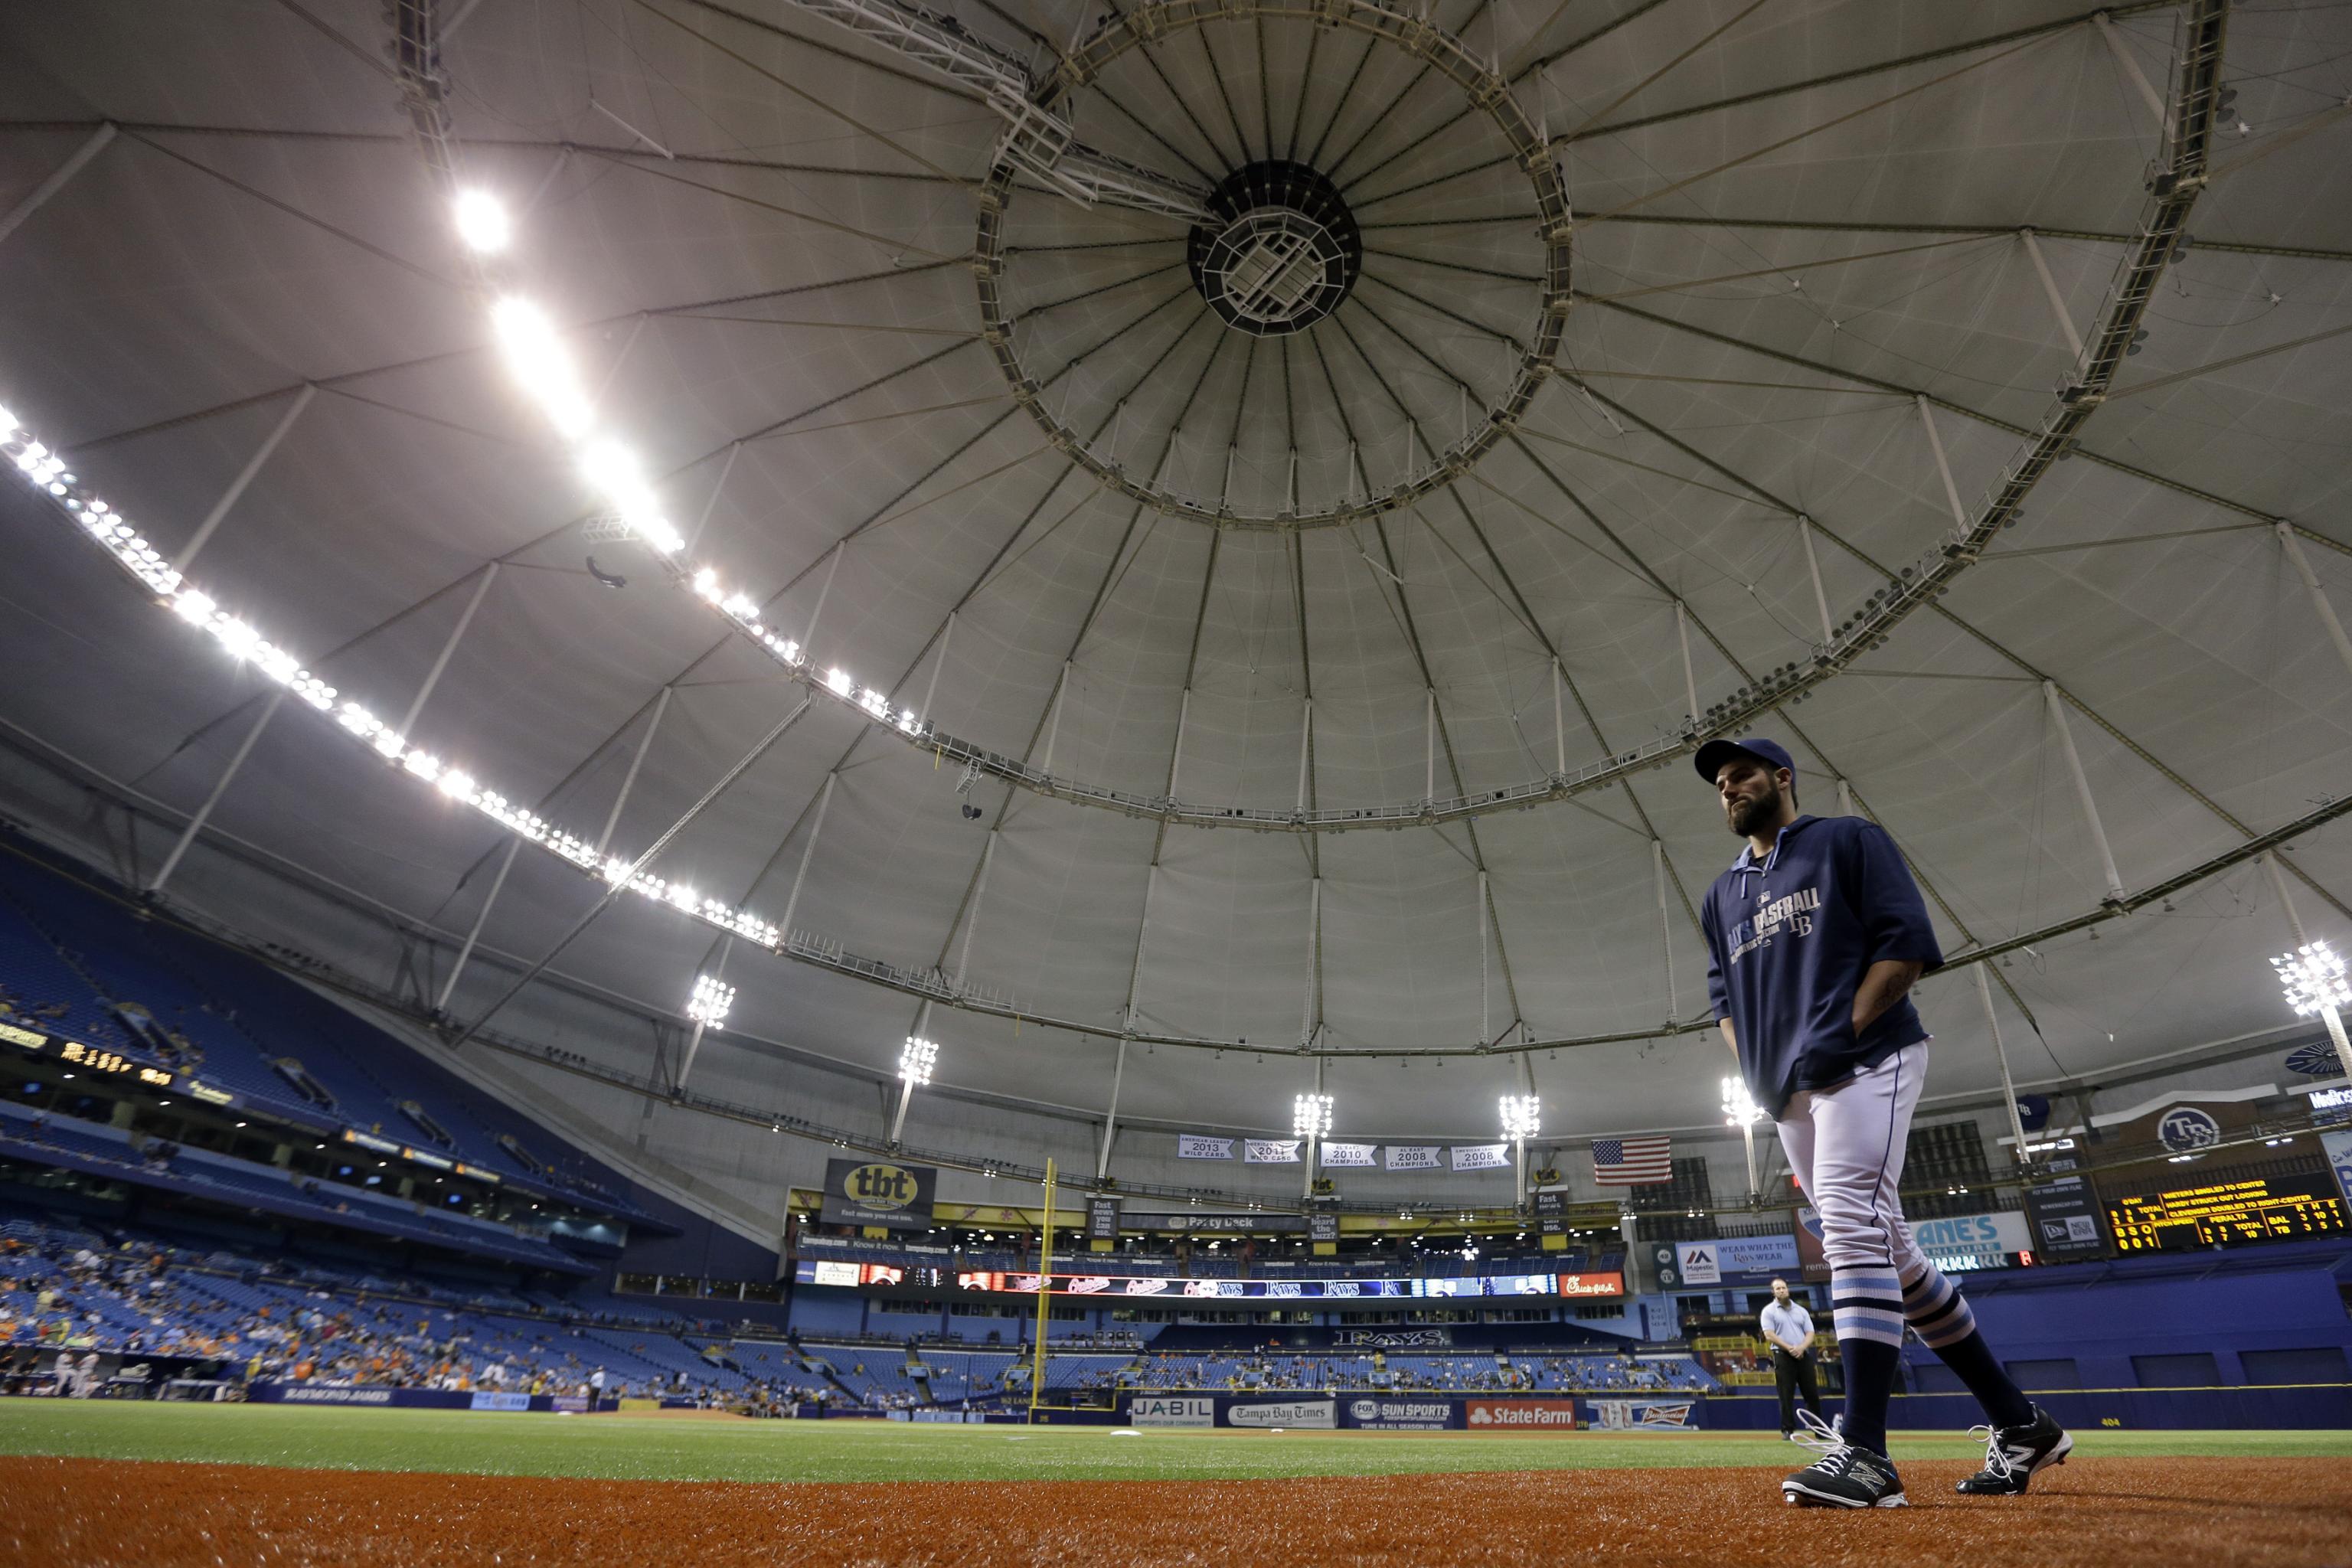 Tropicana Field to increase capacity to 20,000 fans Tuesday